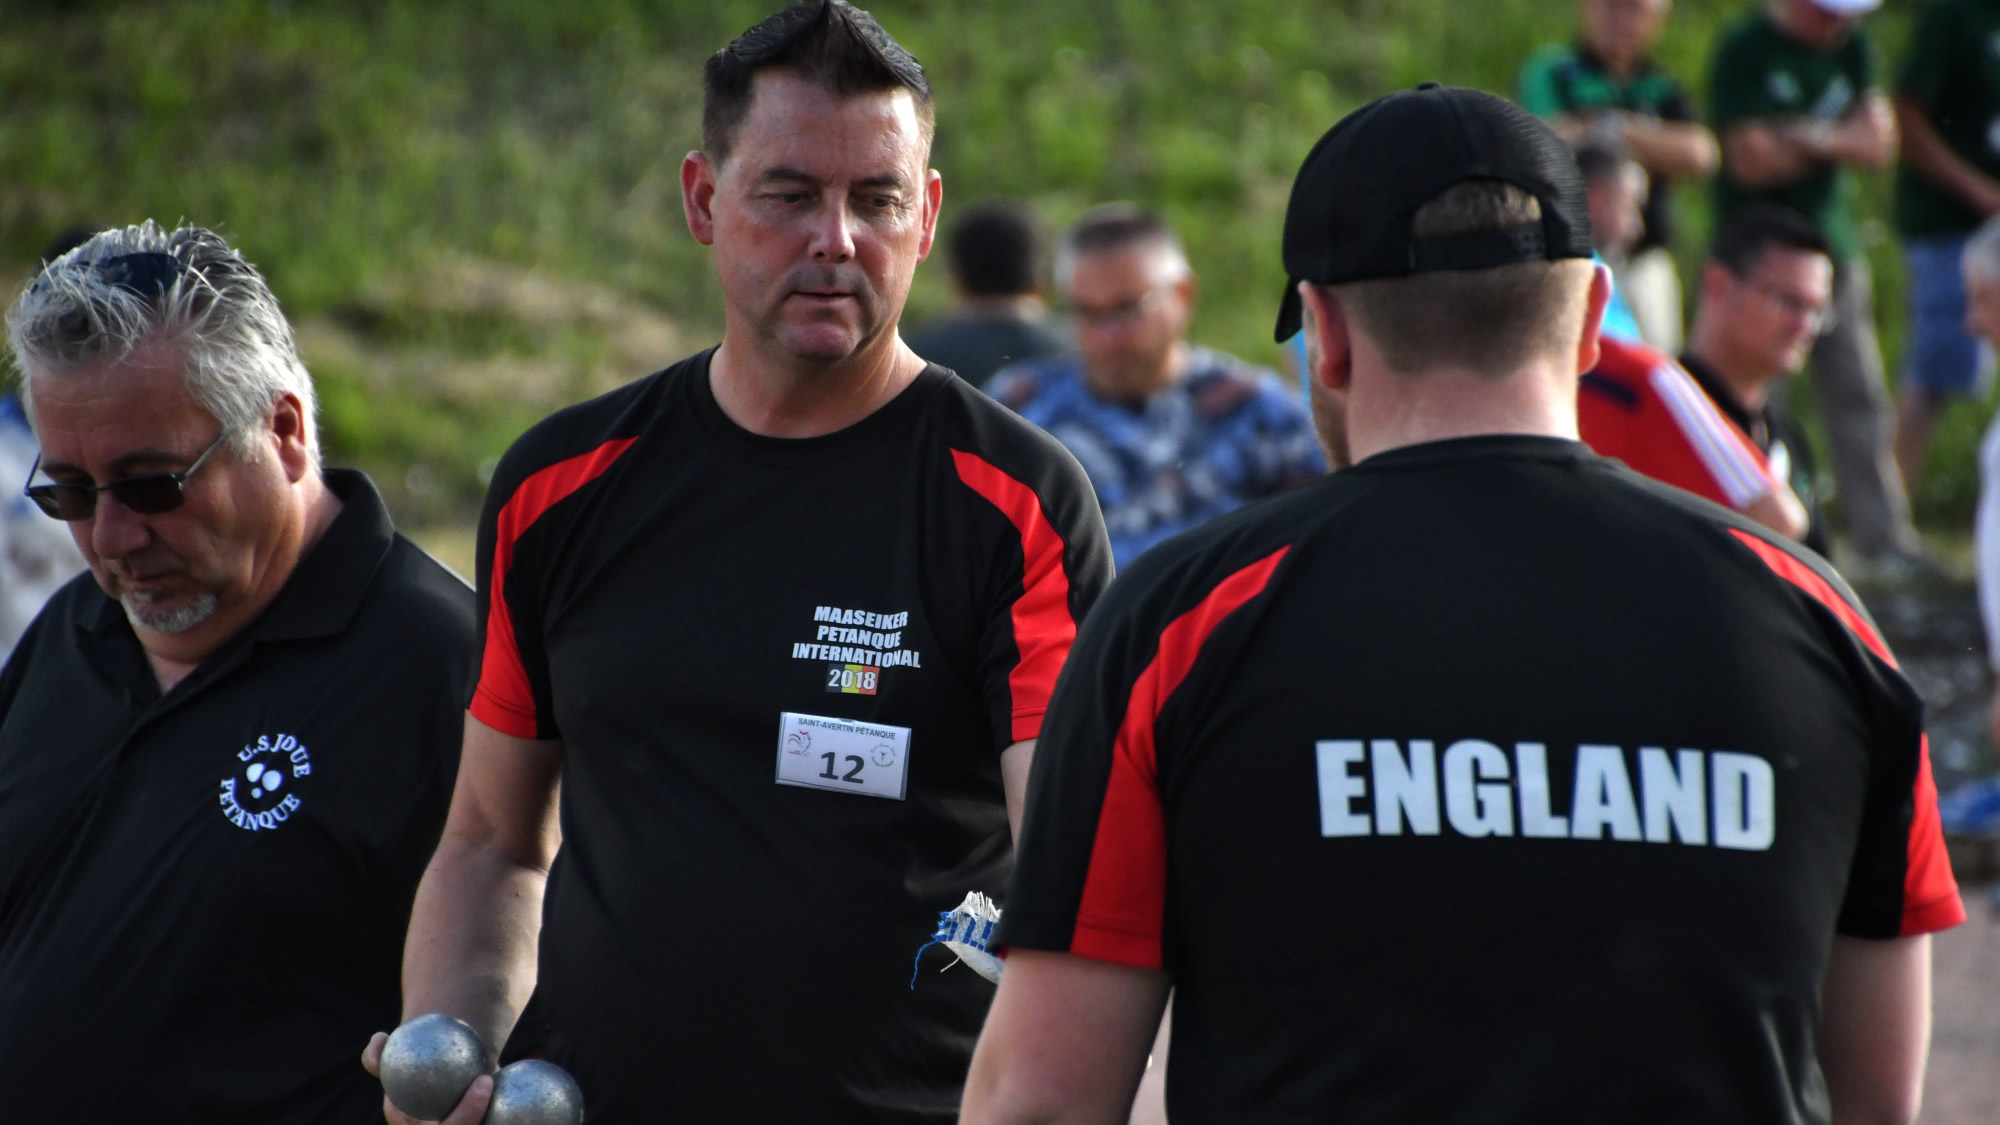 The England team Barry Wing and Jason White playing in the Pétanque Grand Prix de Saint-Avertin